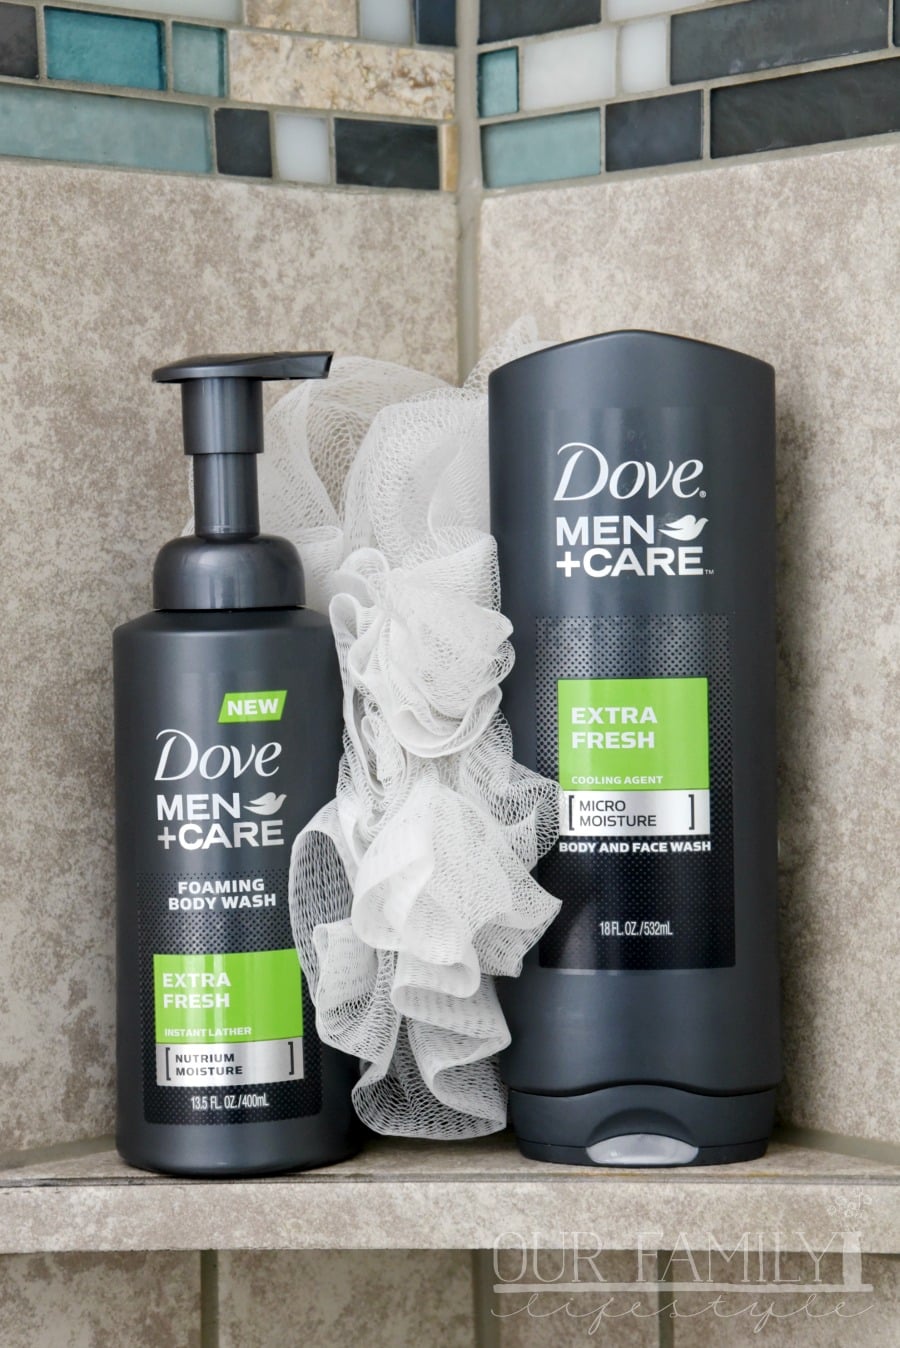 Dove Men+Care body and face wash